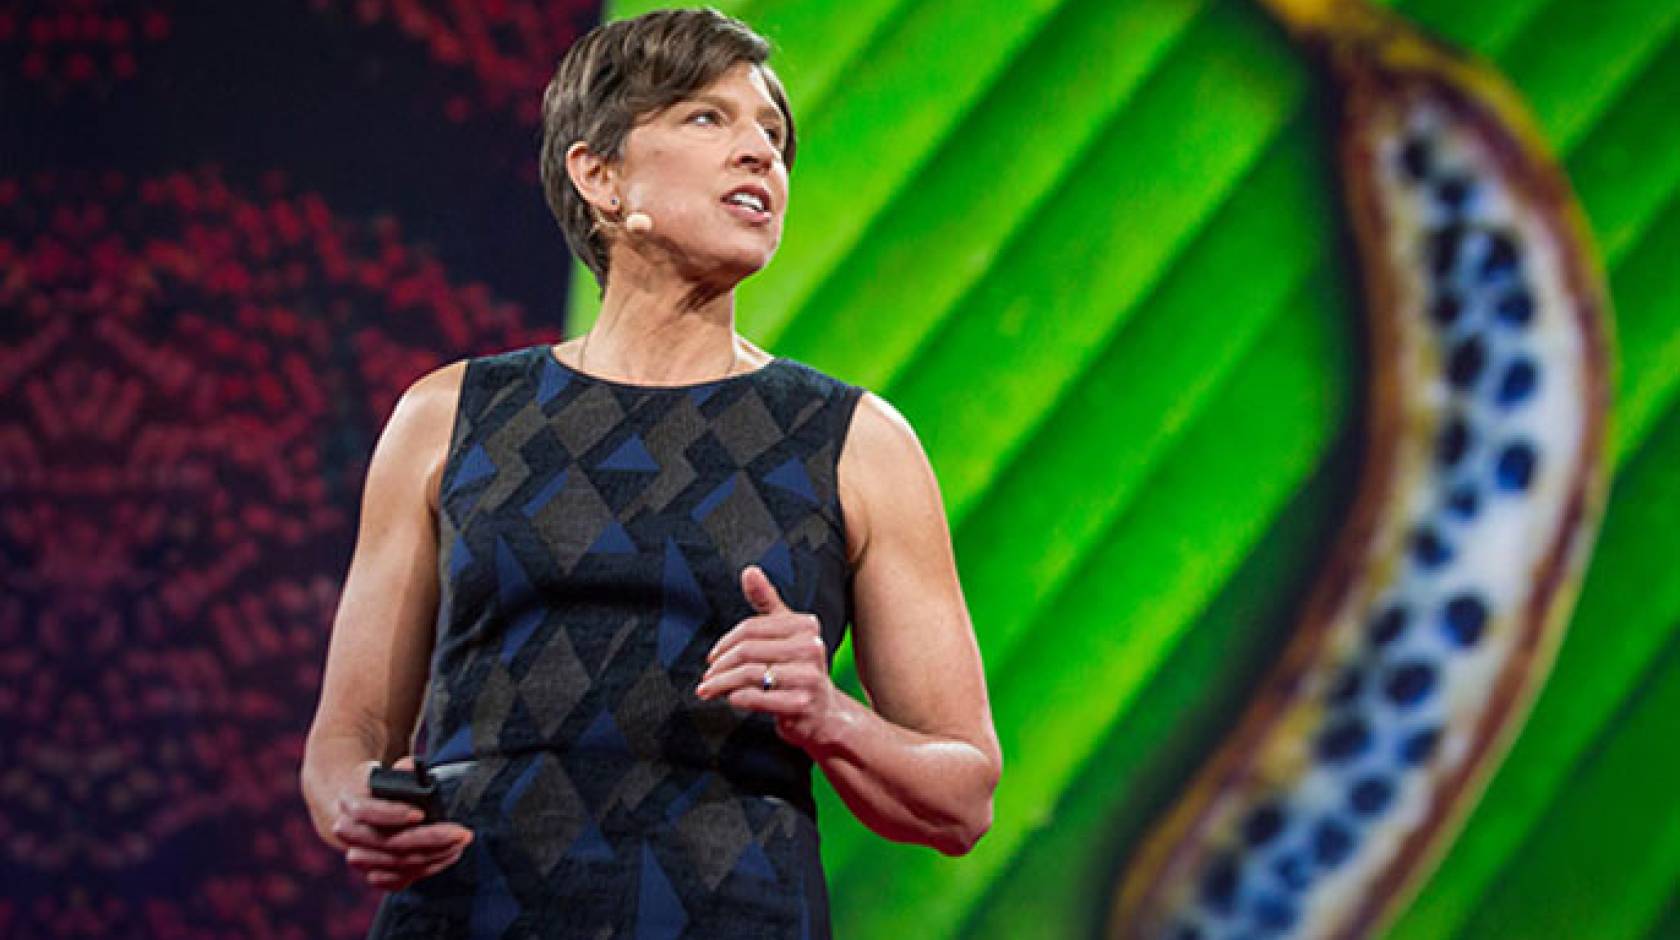 In a TED talk, Pamela Ronald describes her decade-long quest to isolate a gene that allows rice to survive prolonged flooding.